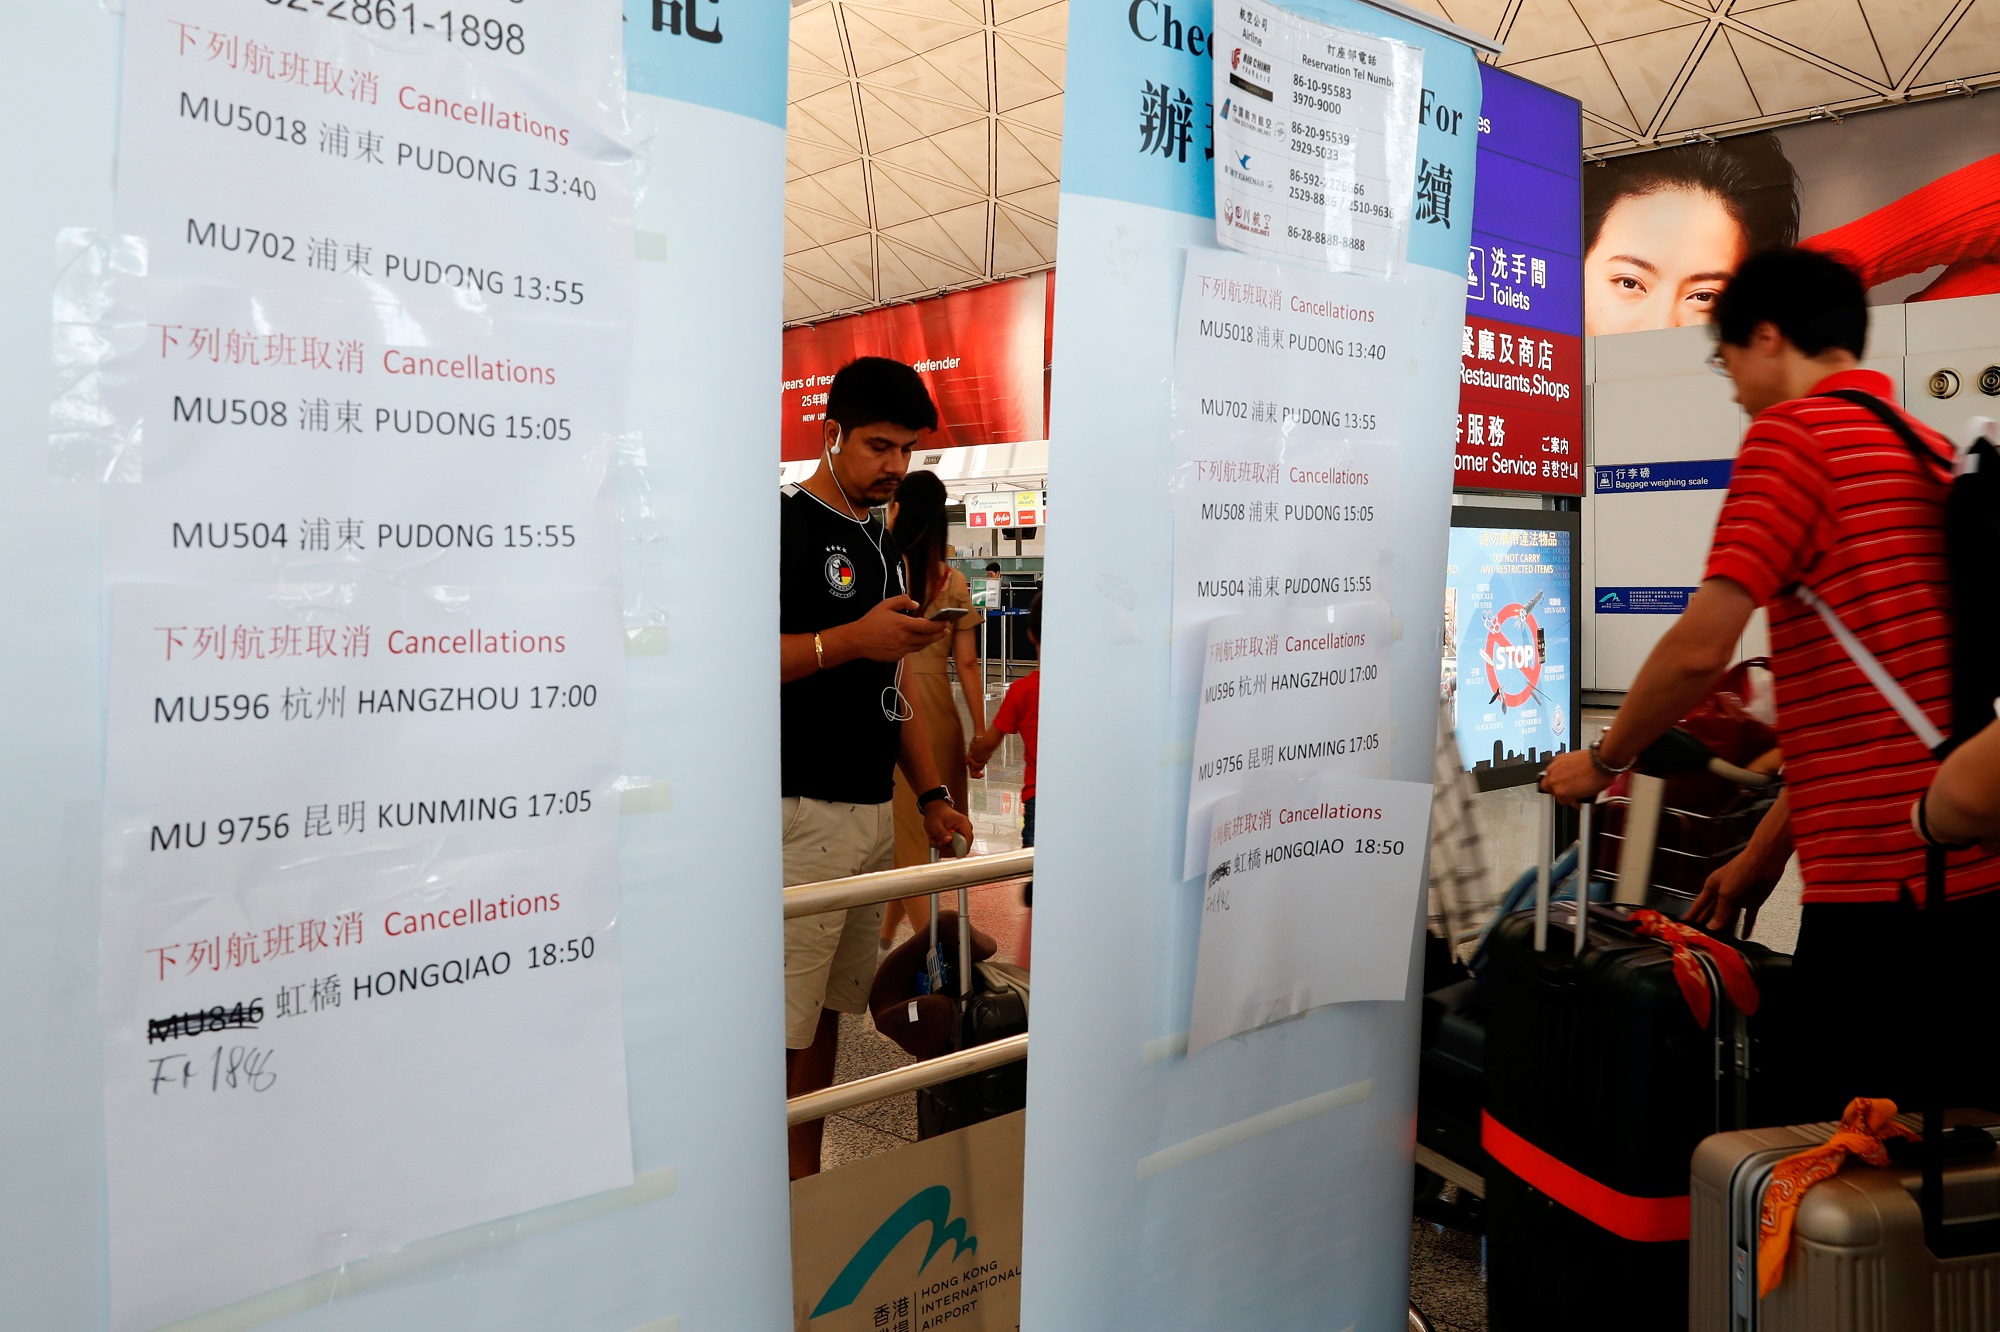 A board showing cancelled flights during a strike supporting the anti-extradition bill protest at Hong Kong international airport in Hong Kong, China August 5, 2019. REUTERS/Tyrone Siu